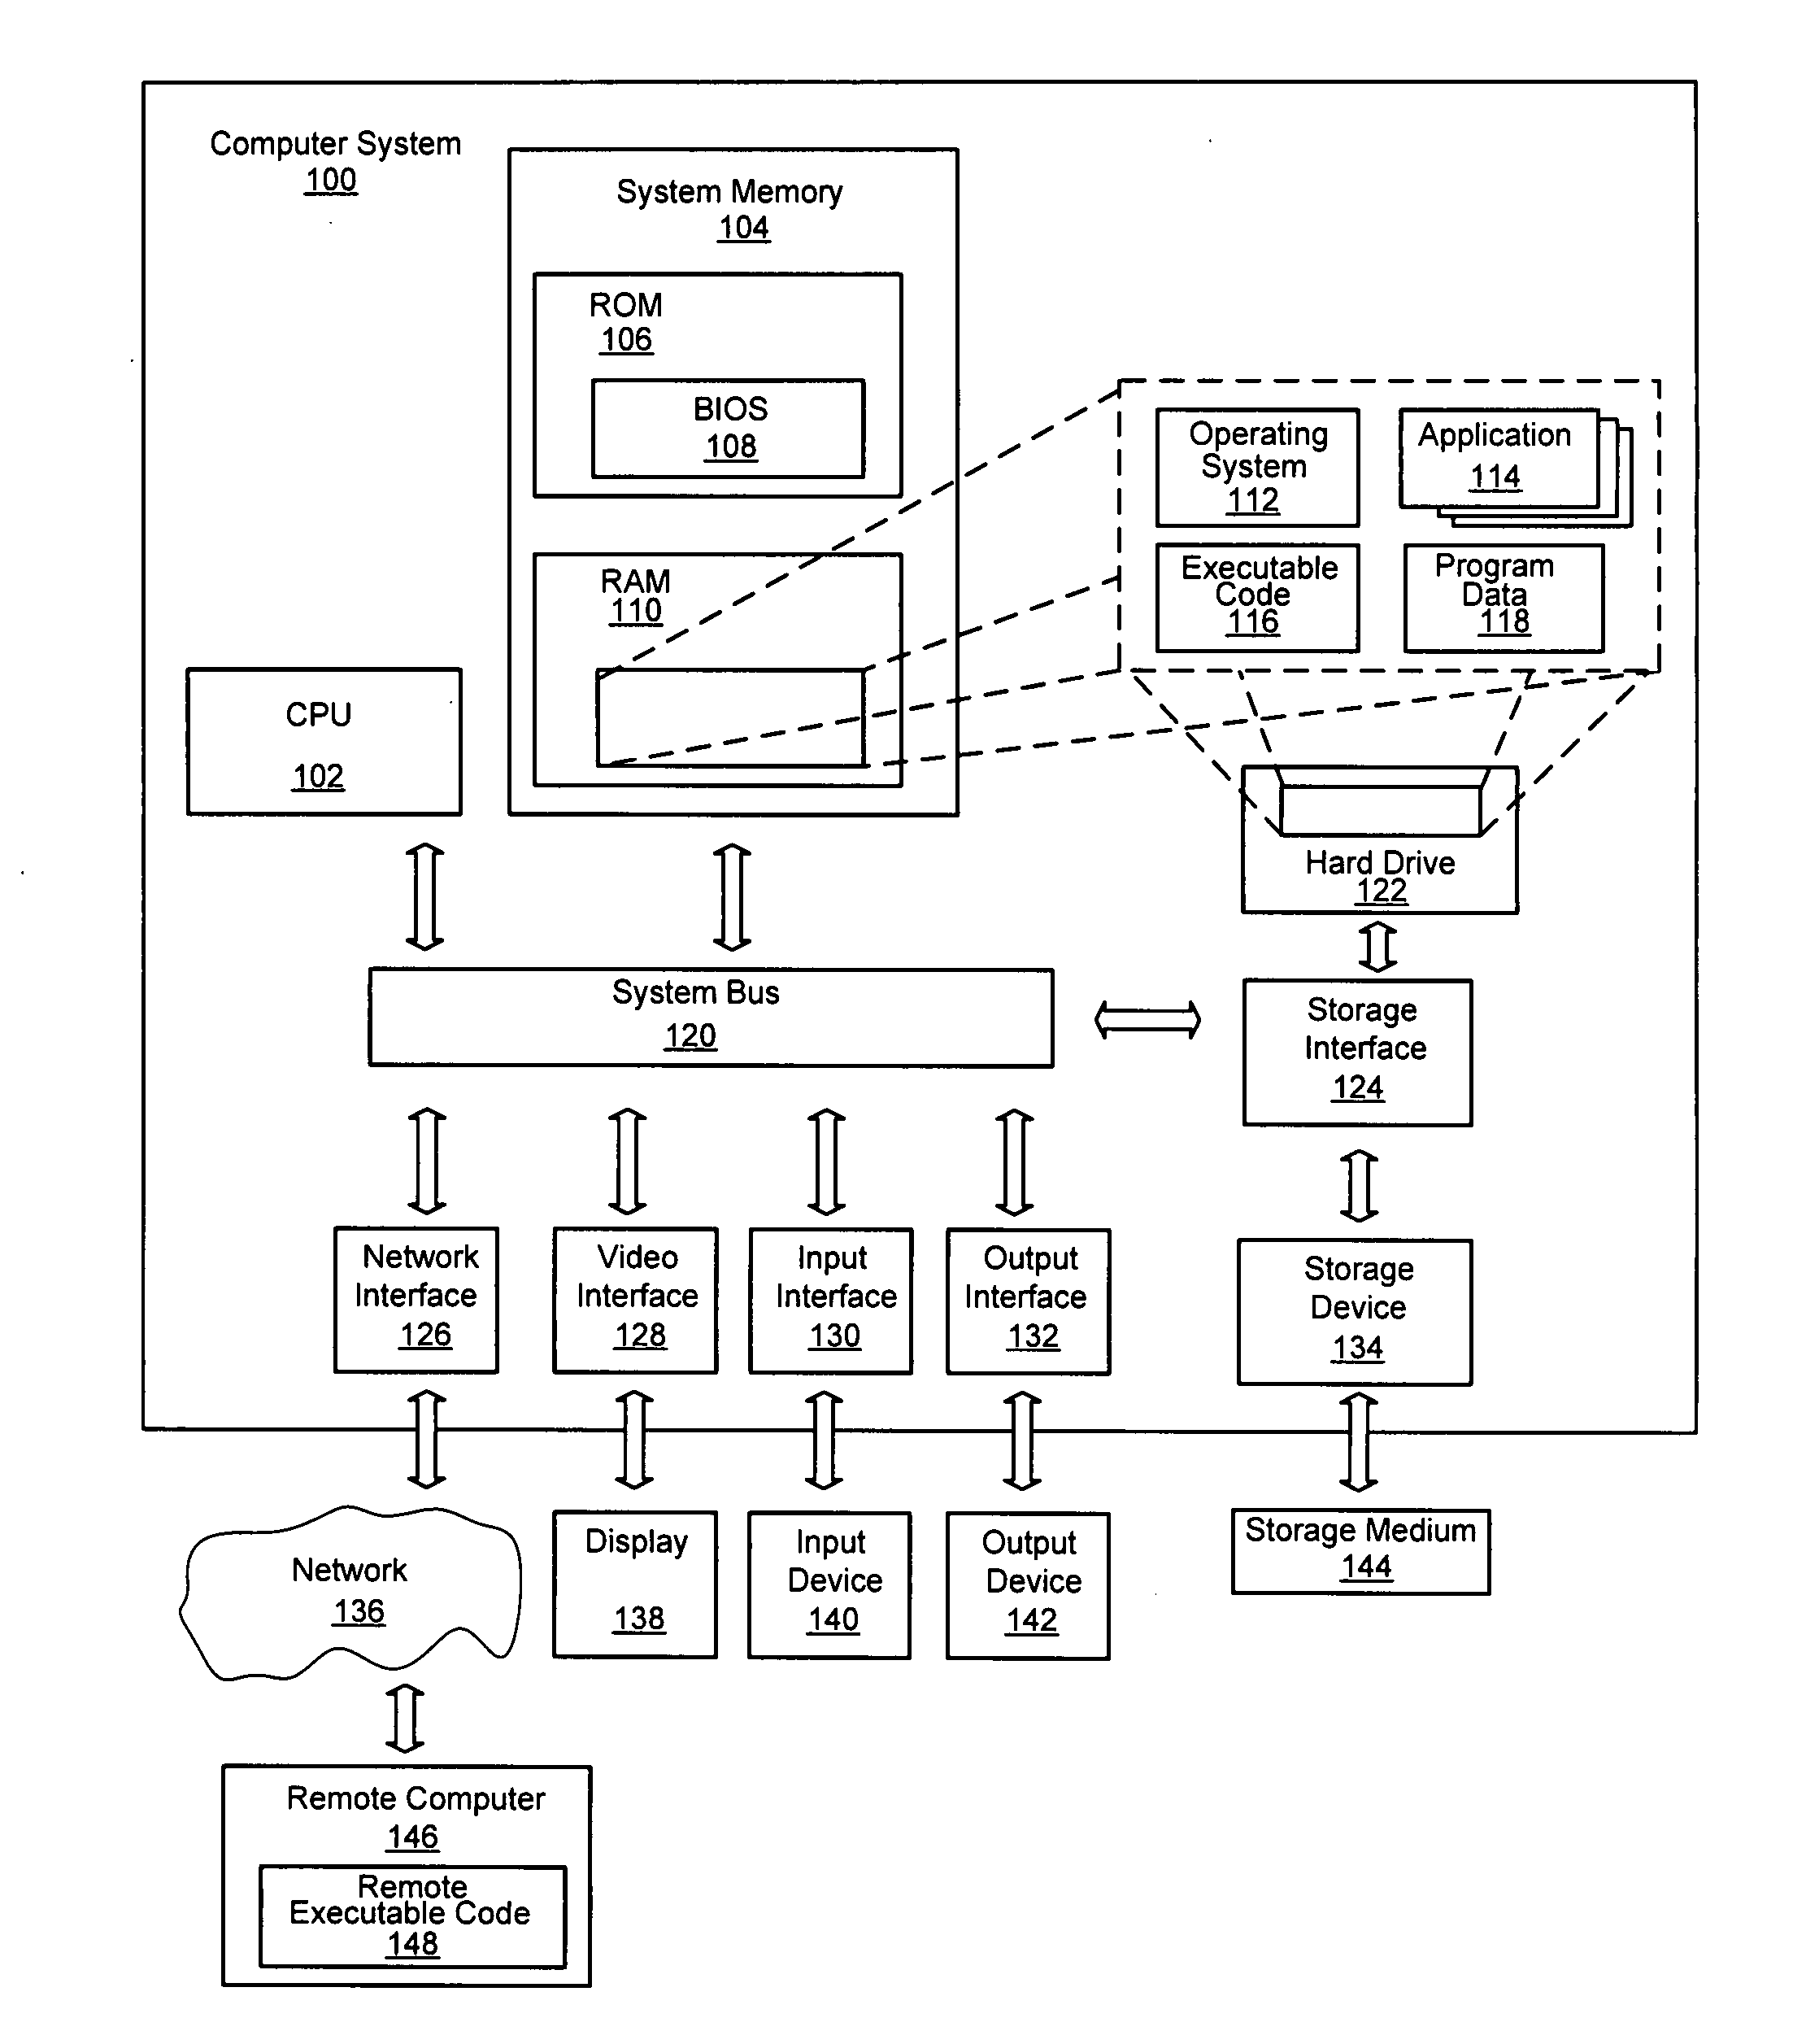 System and method for string processing and searching using a compressed permuterm index